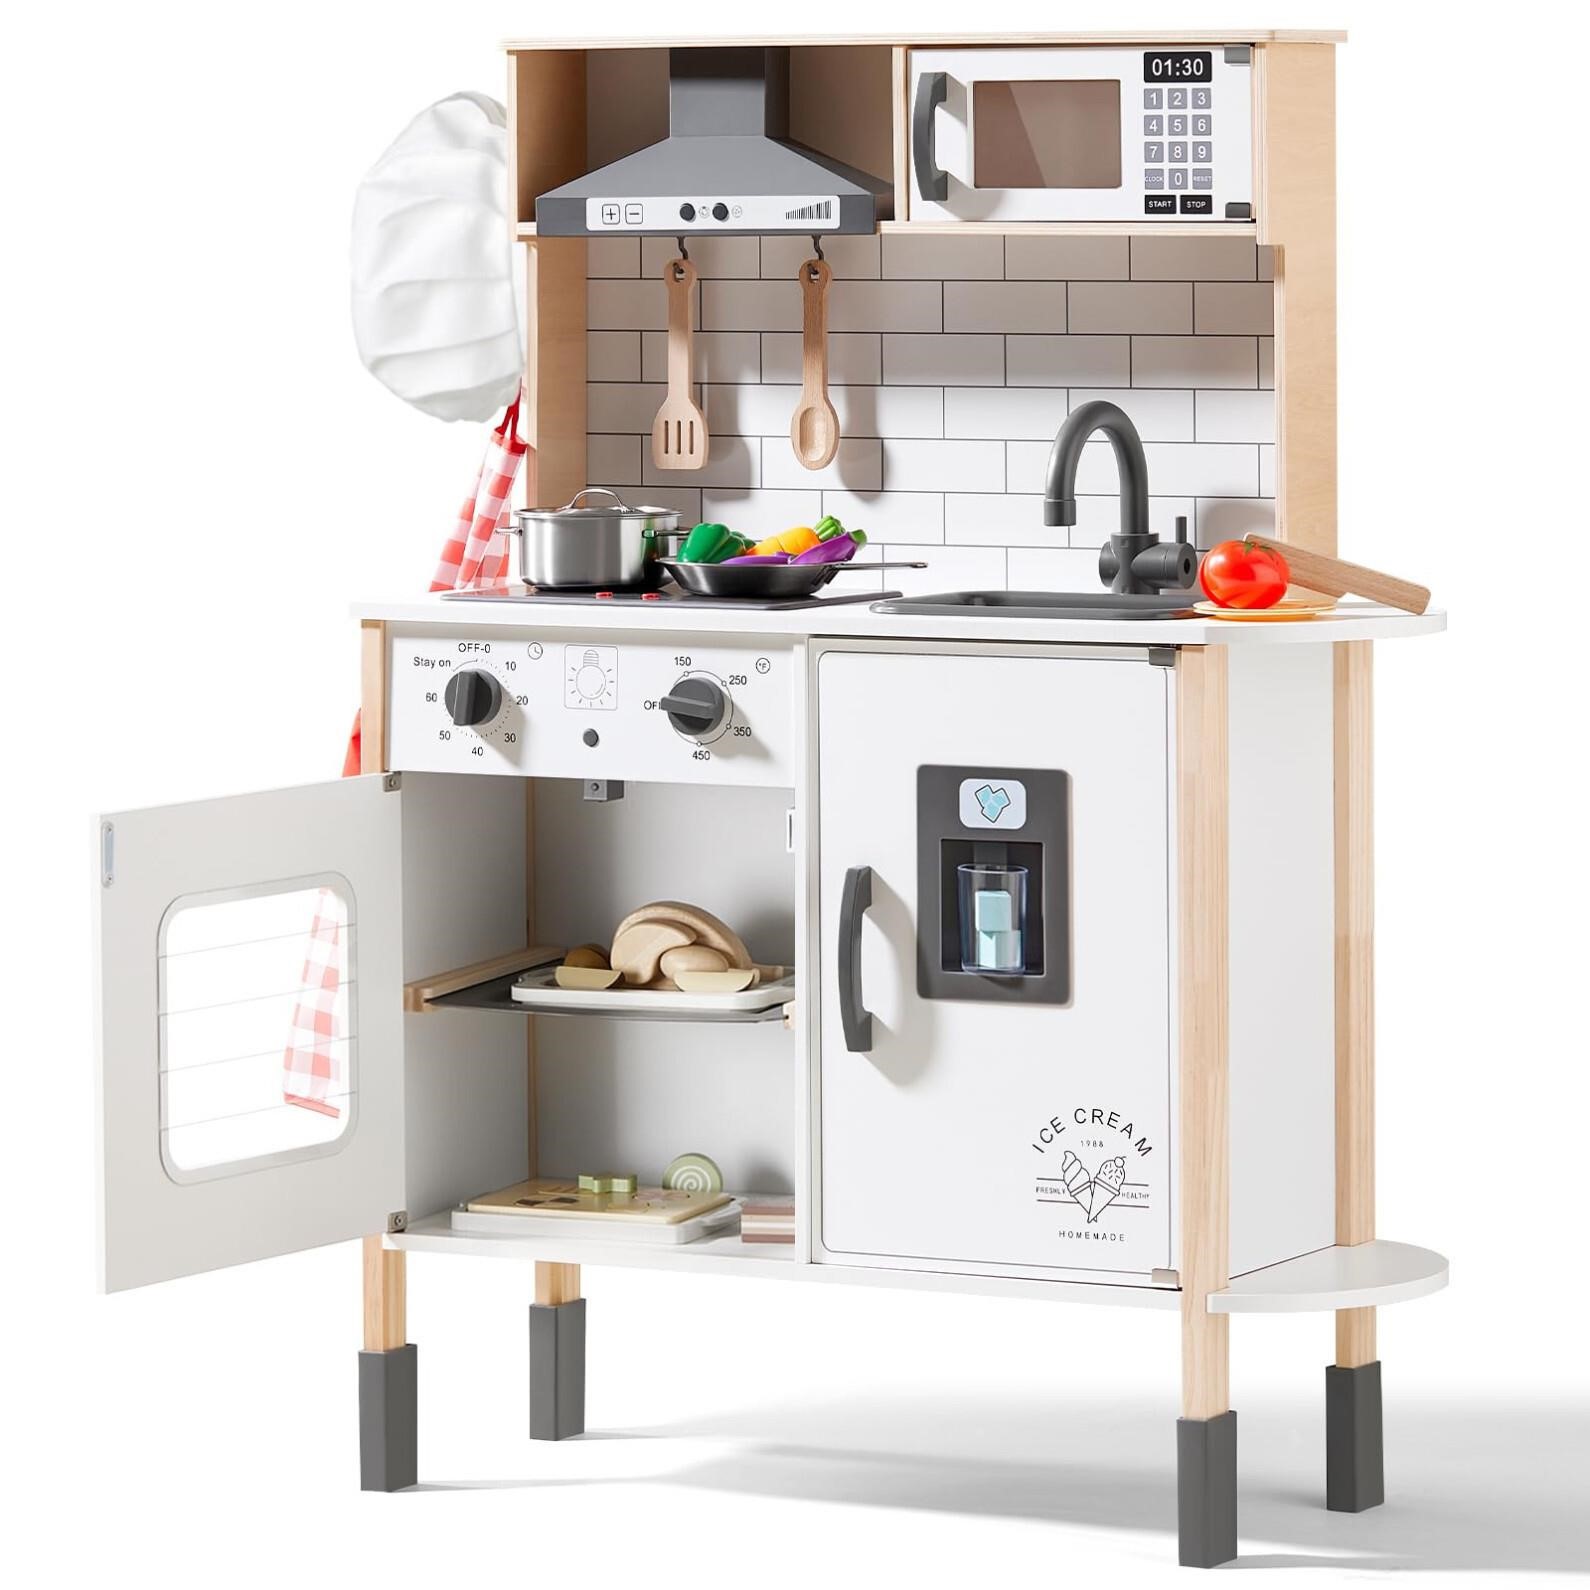 Tiny Land Play Kitchen for Kids, Wooden Kids Play